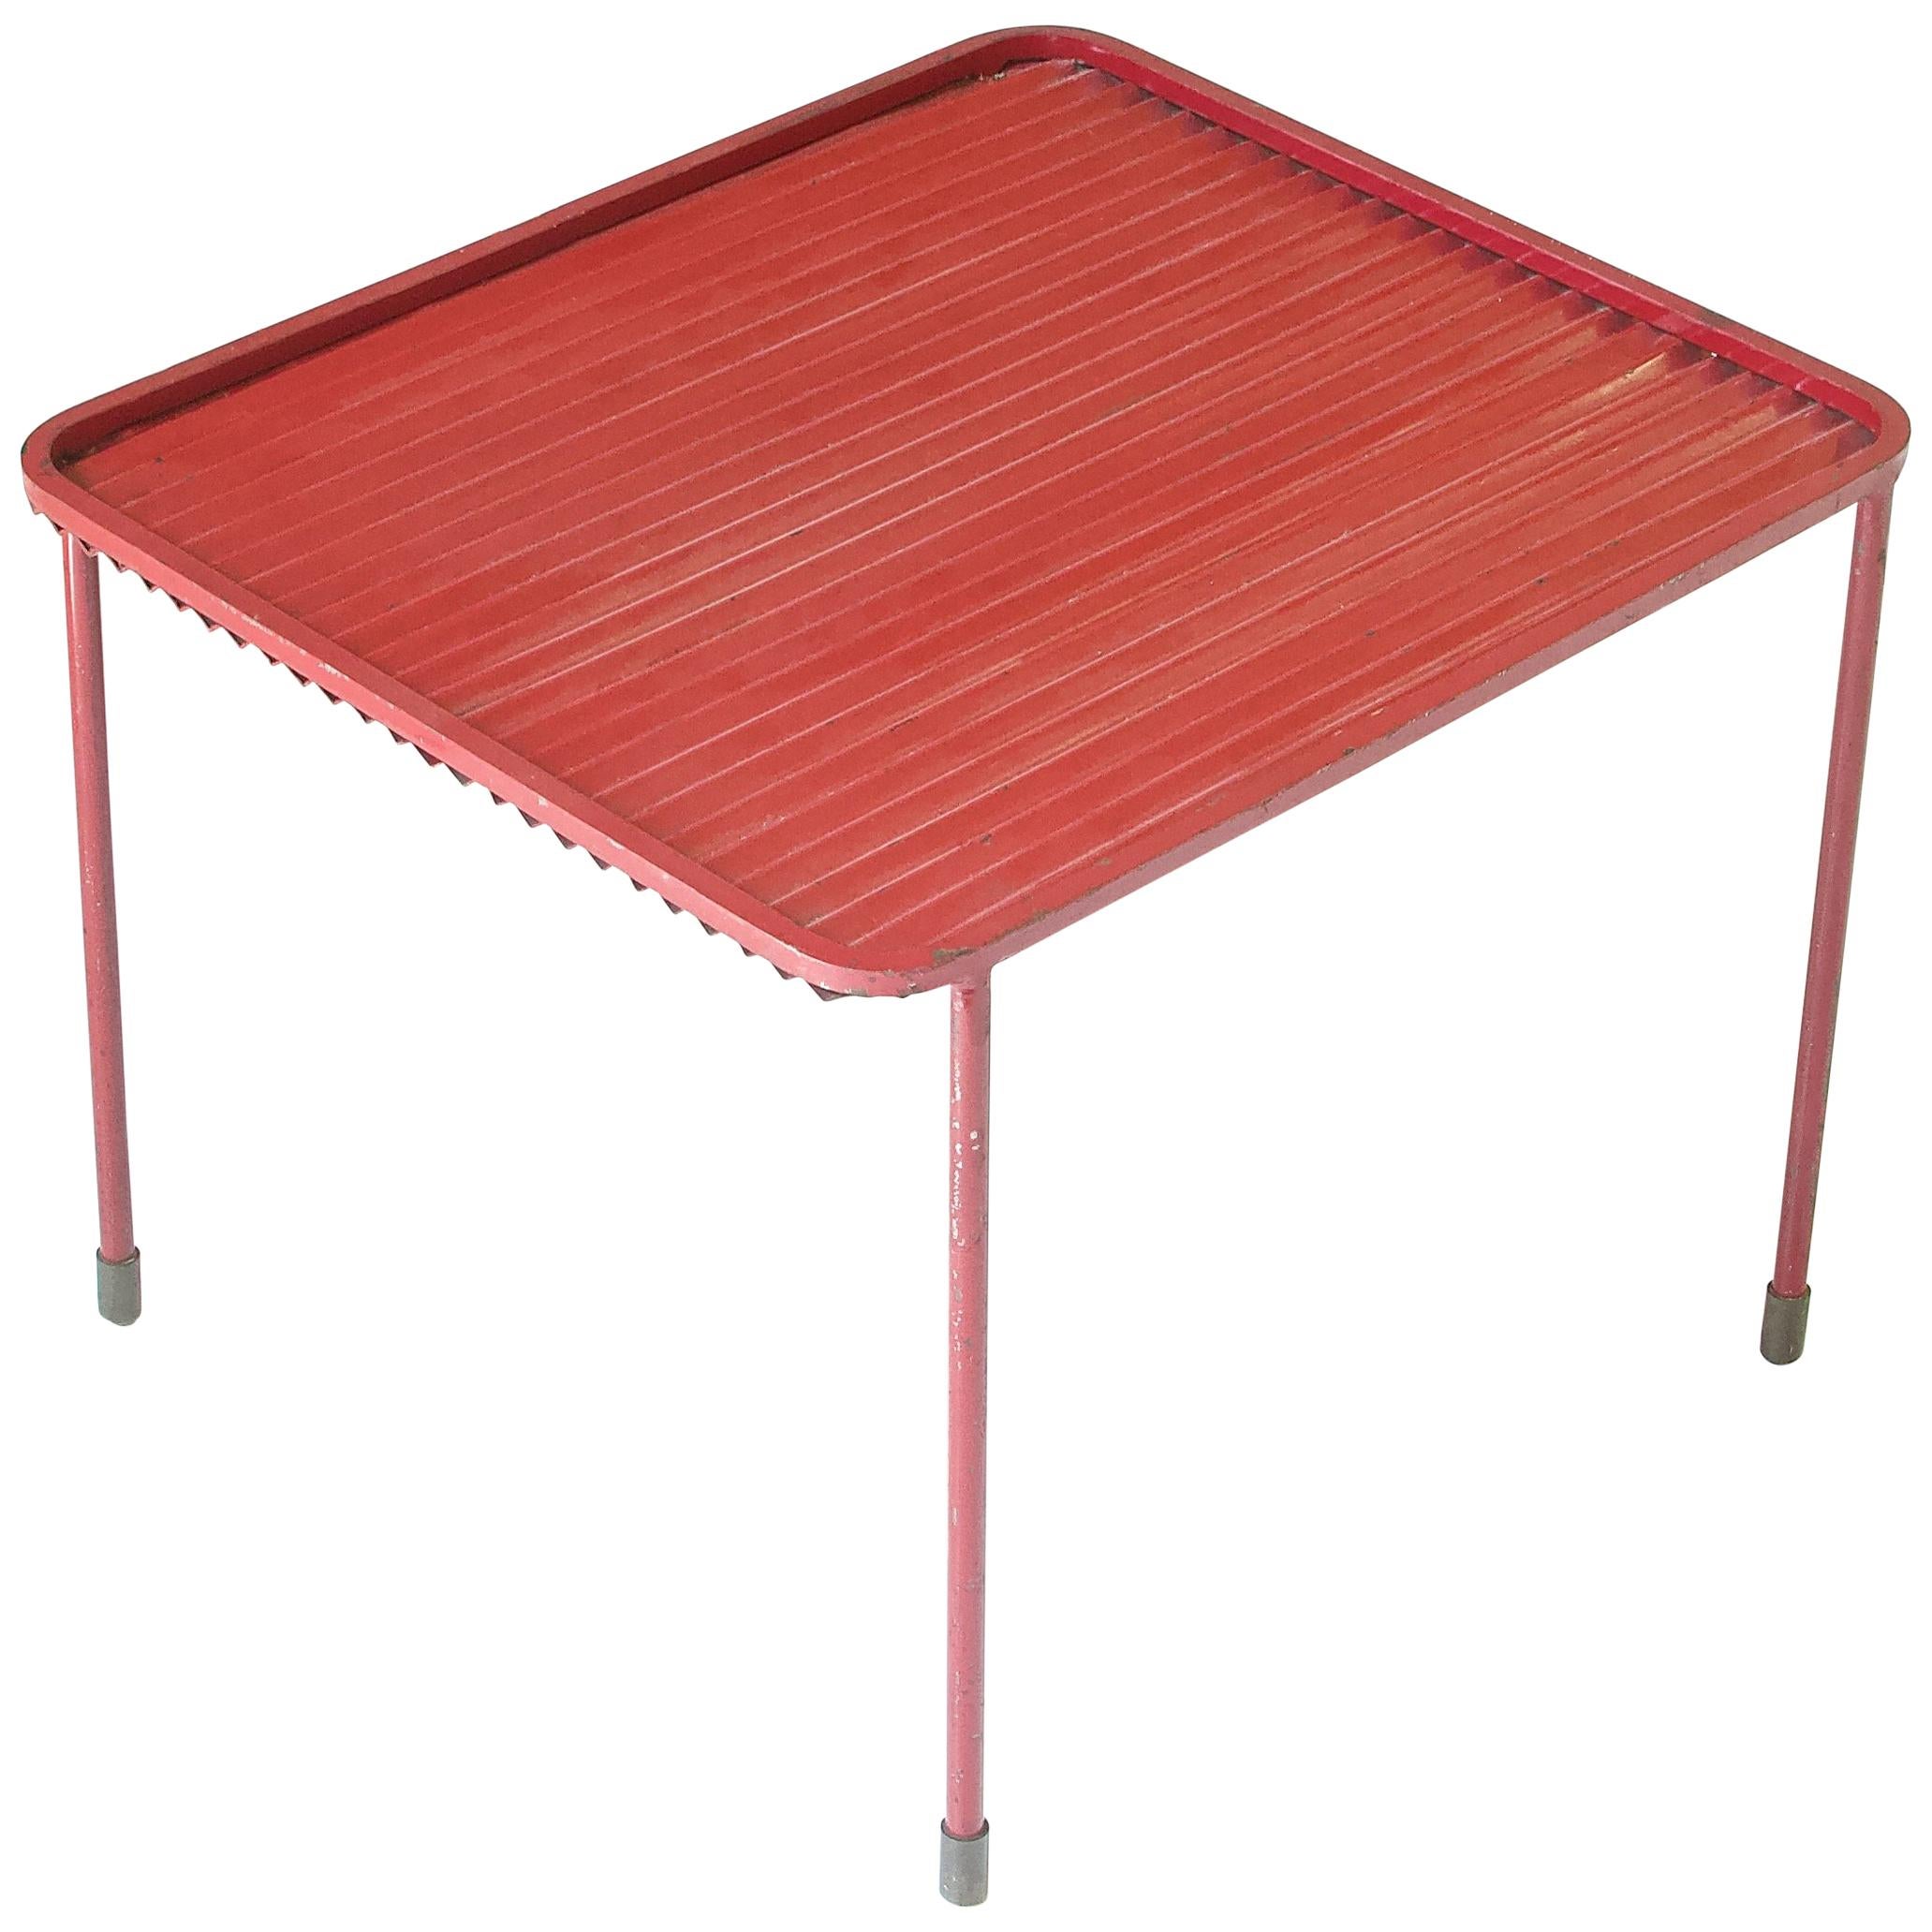 Vintage Mathieu Matégot Red-Painted Corrugated Steel Side Table, France, 1950s